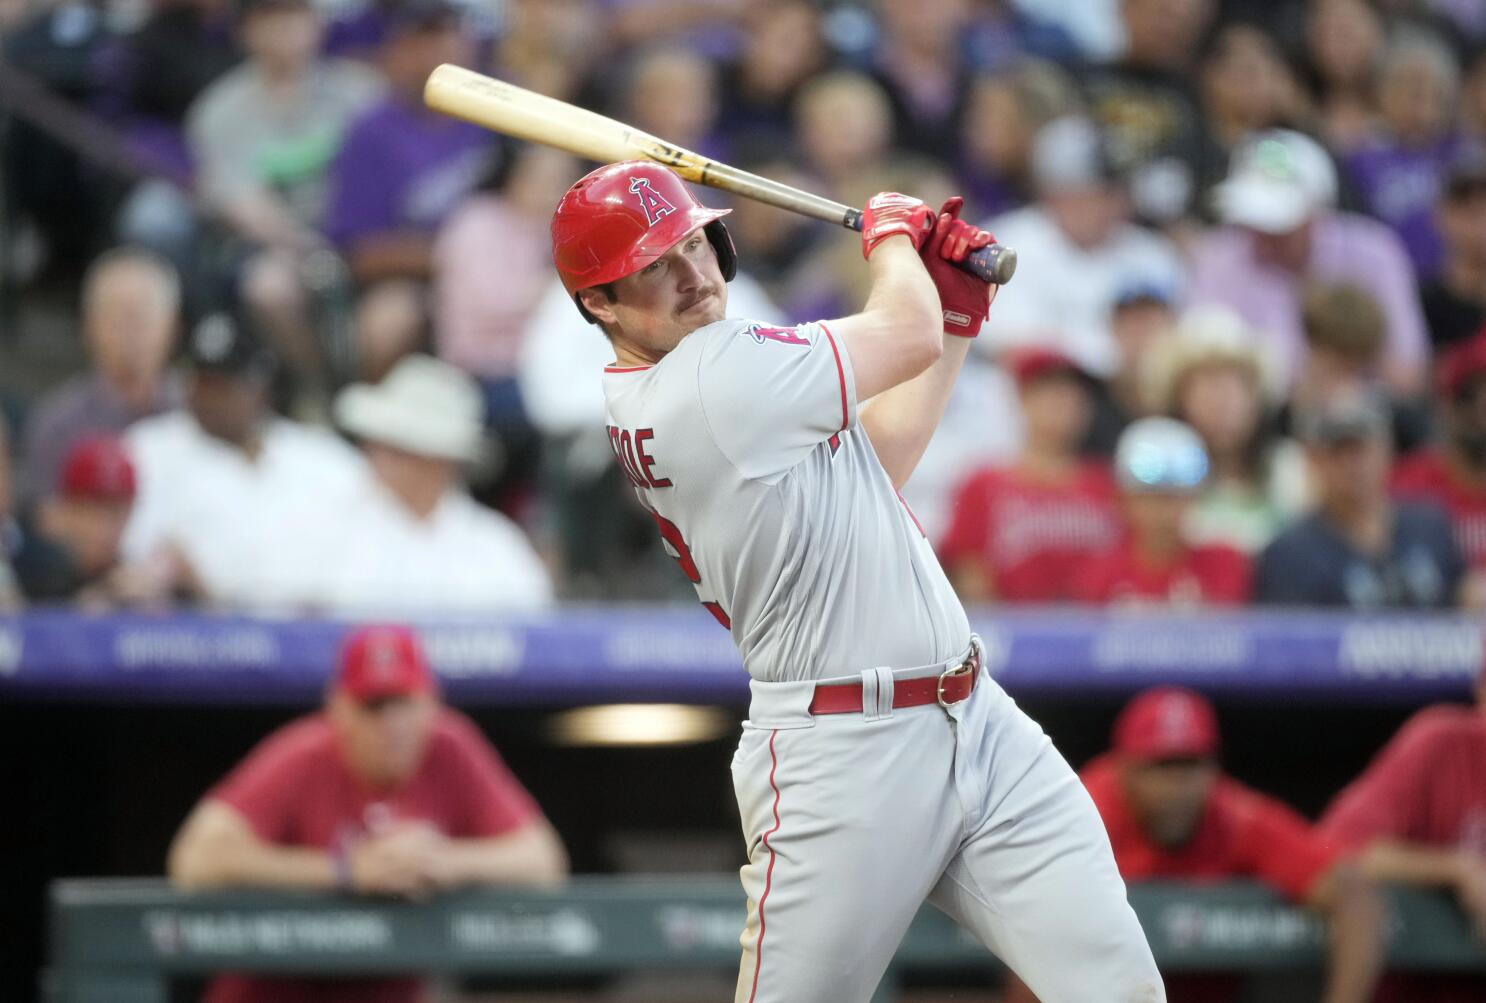 Angels fall to Rockies a day after winning by 24 runs